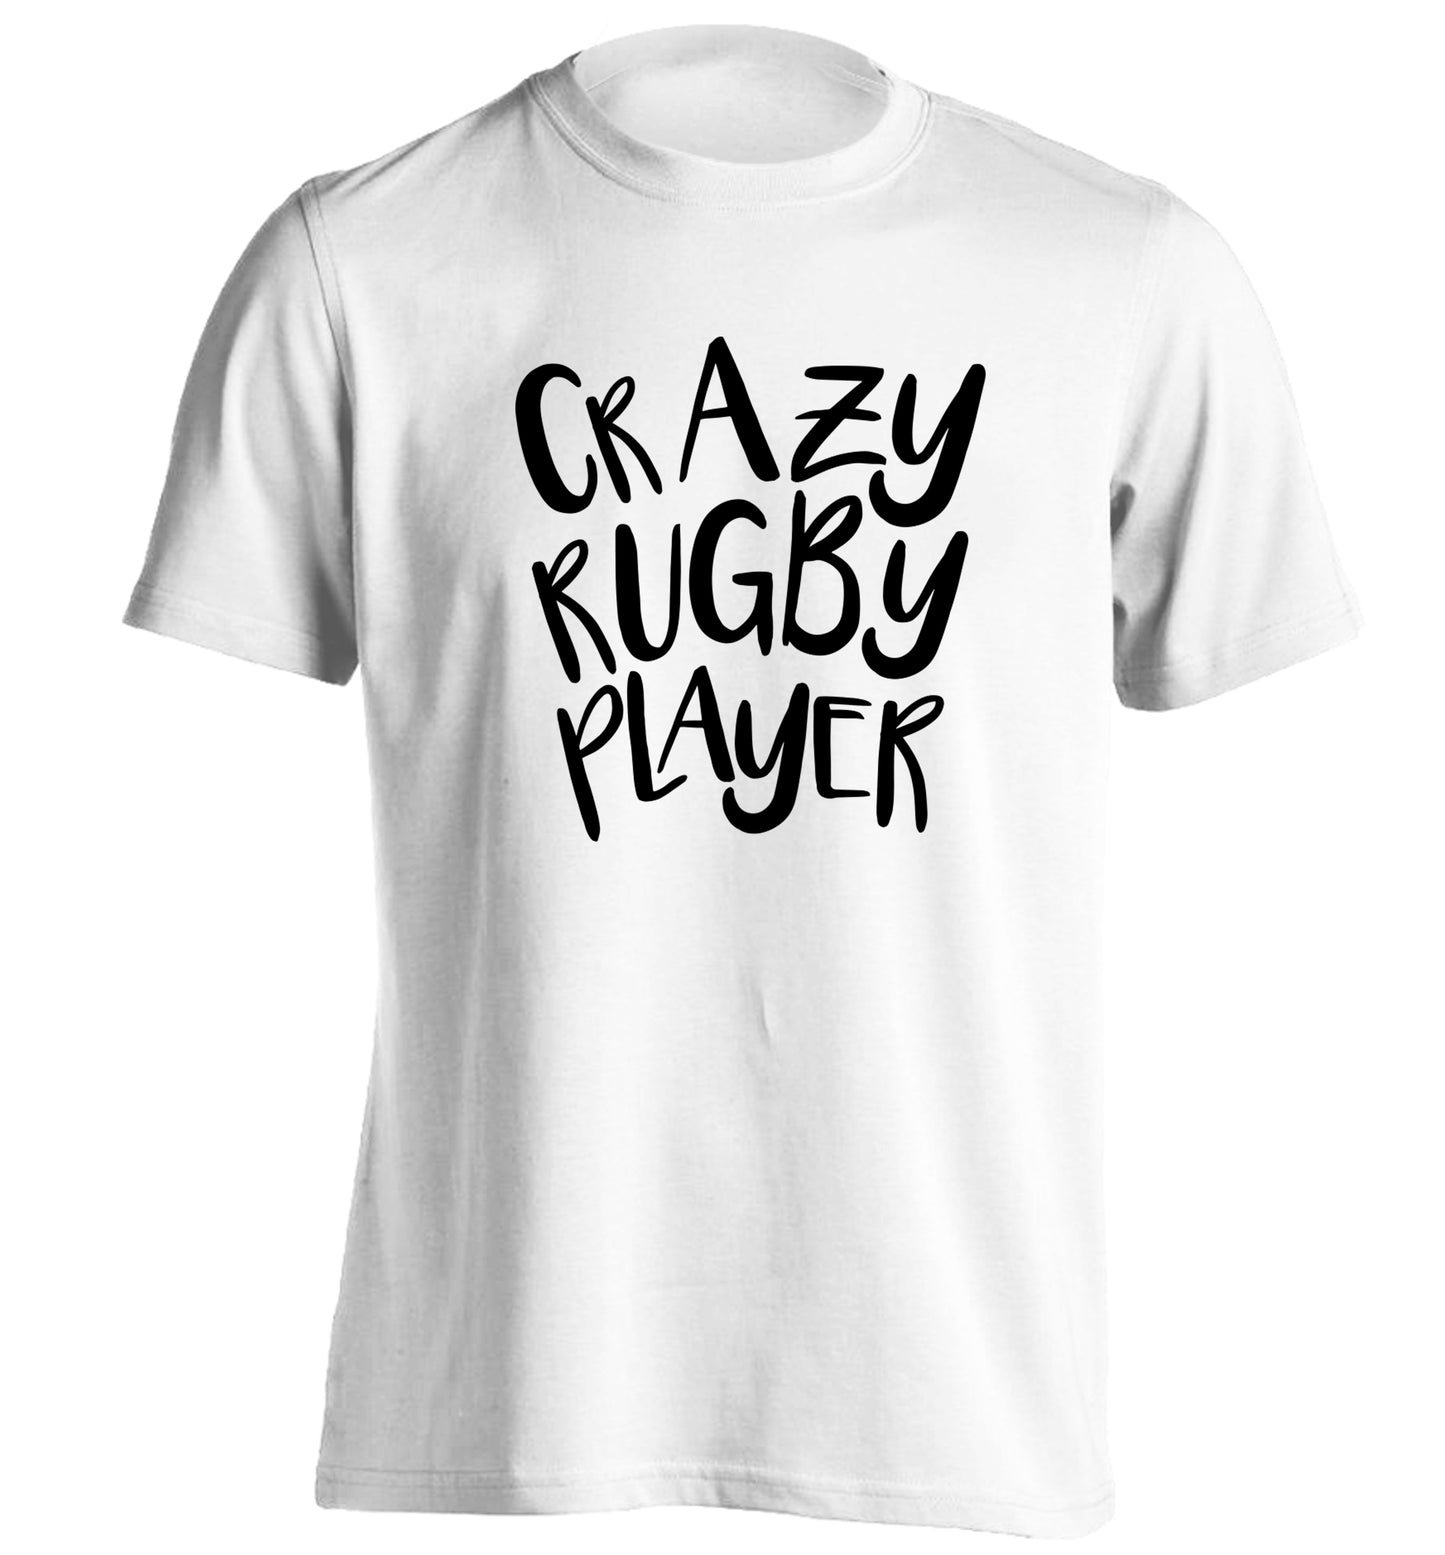 Crazy rugby player adults unisex white Tshirt 2XL